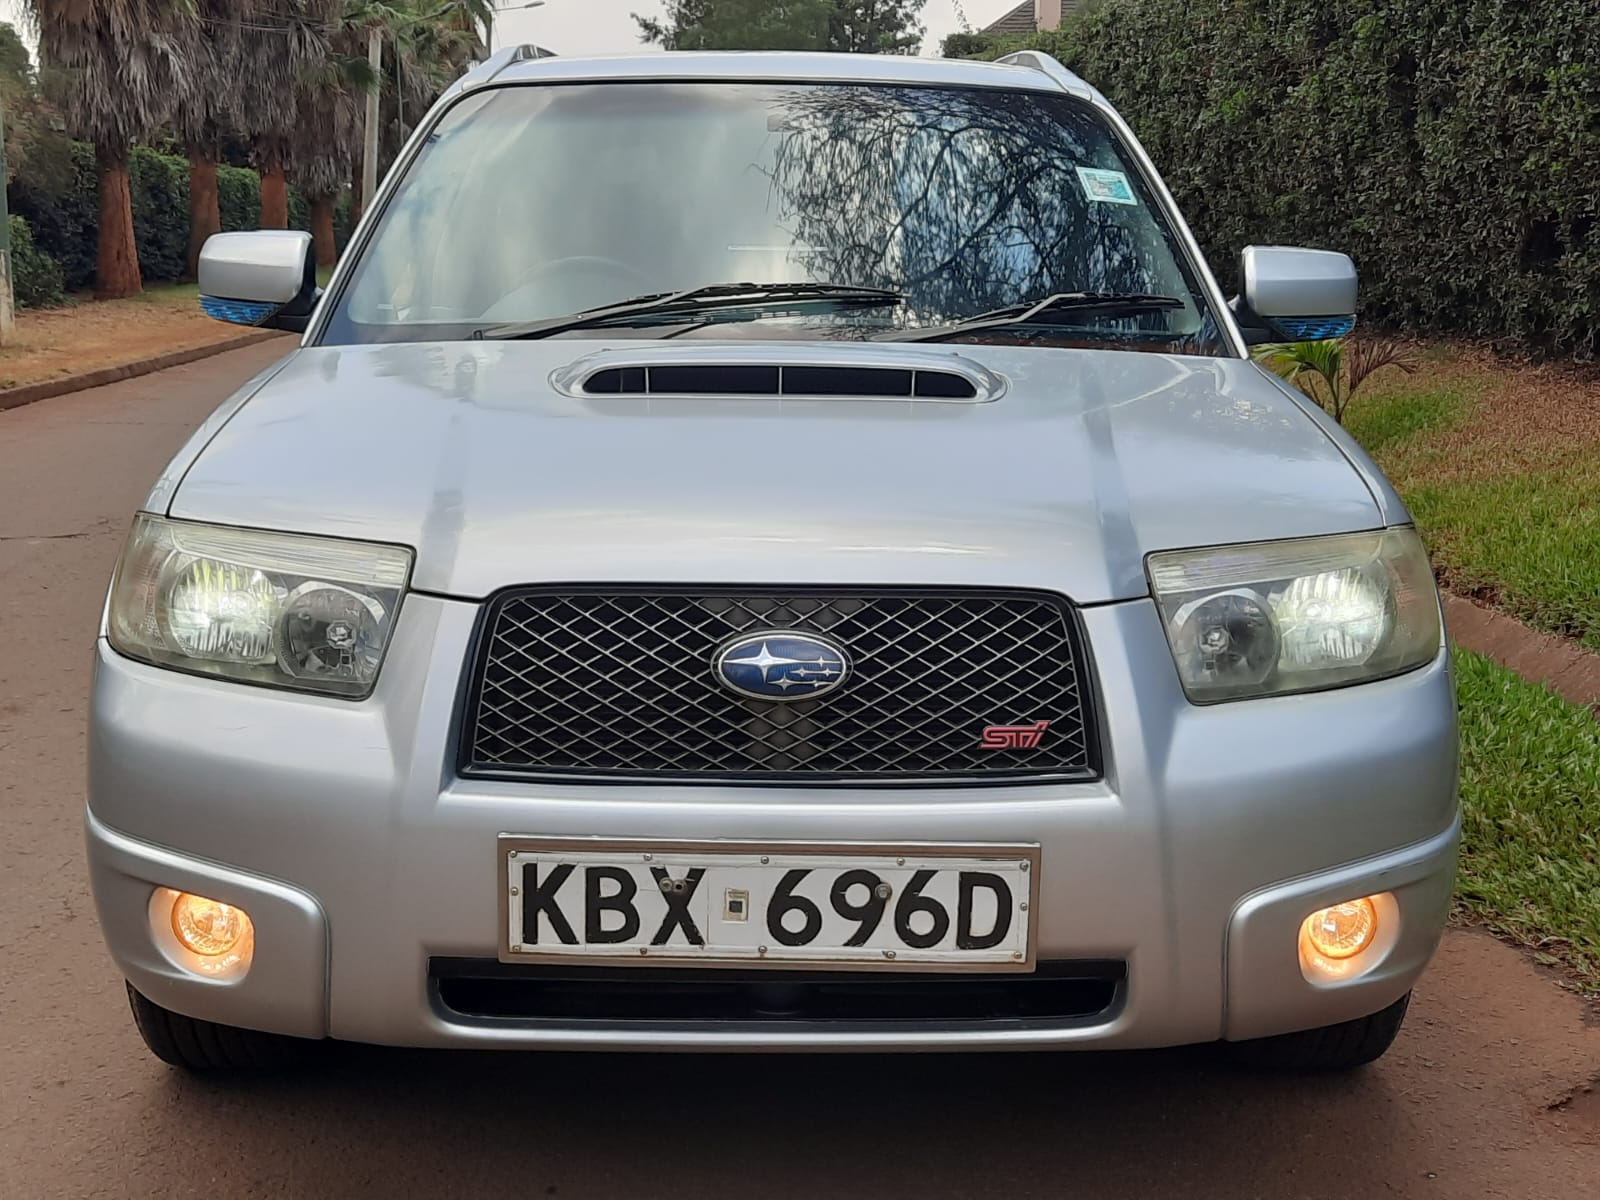 Subaru Forester 2006 SG5 Turbocharged You Pay 20% deposit Trade in Ok